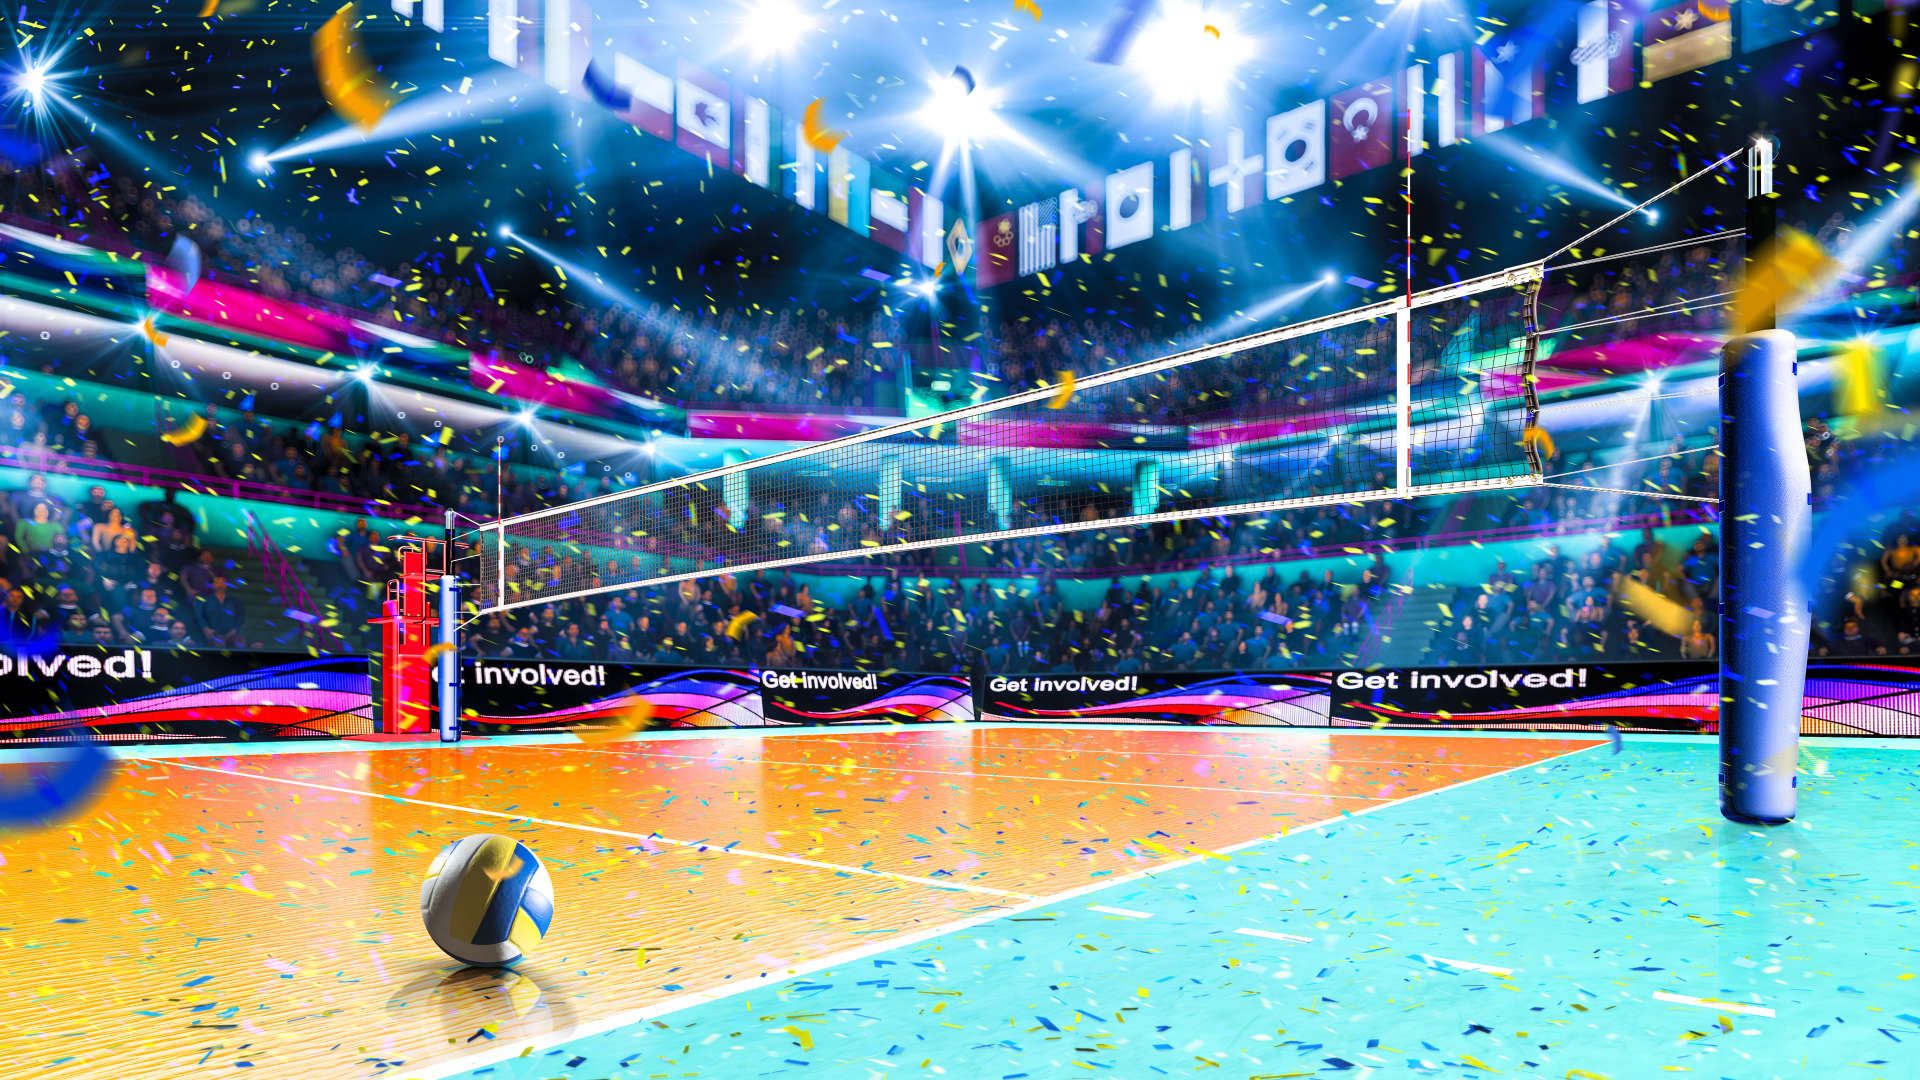 200+] Volleyball Wallpapers | Wallpapers.com